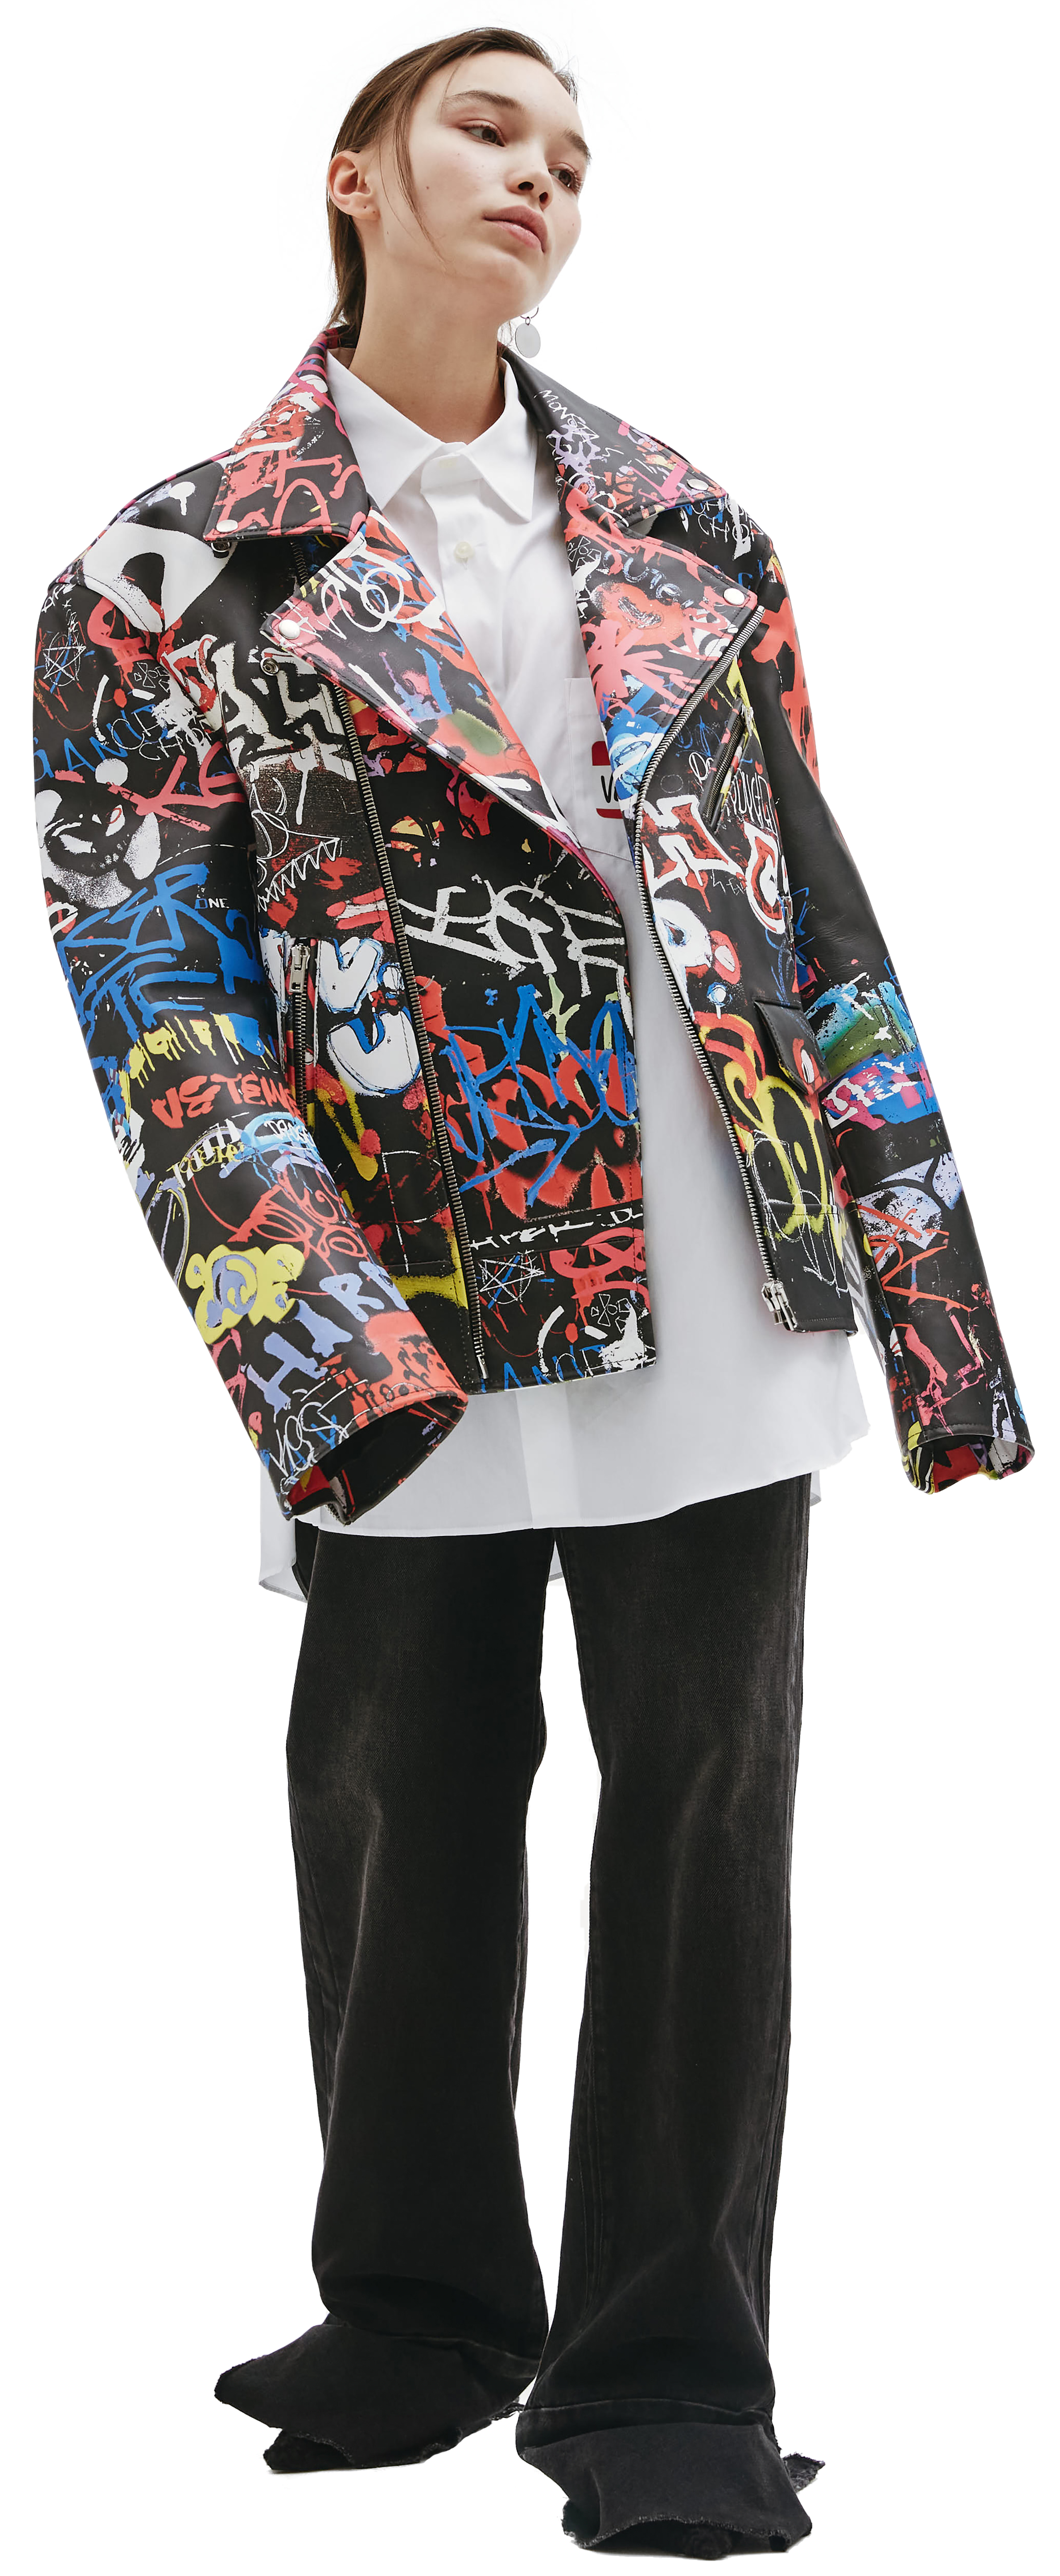 Buy VETEMENTS women multicolor graffiti printed leather jacket for 